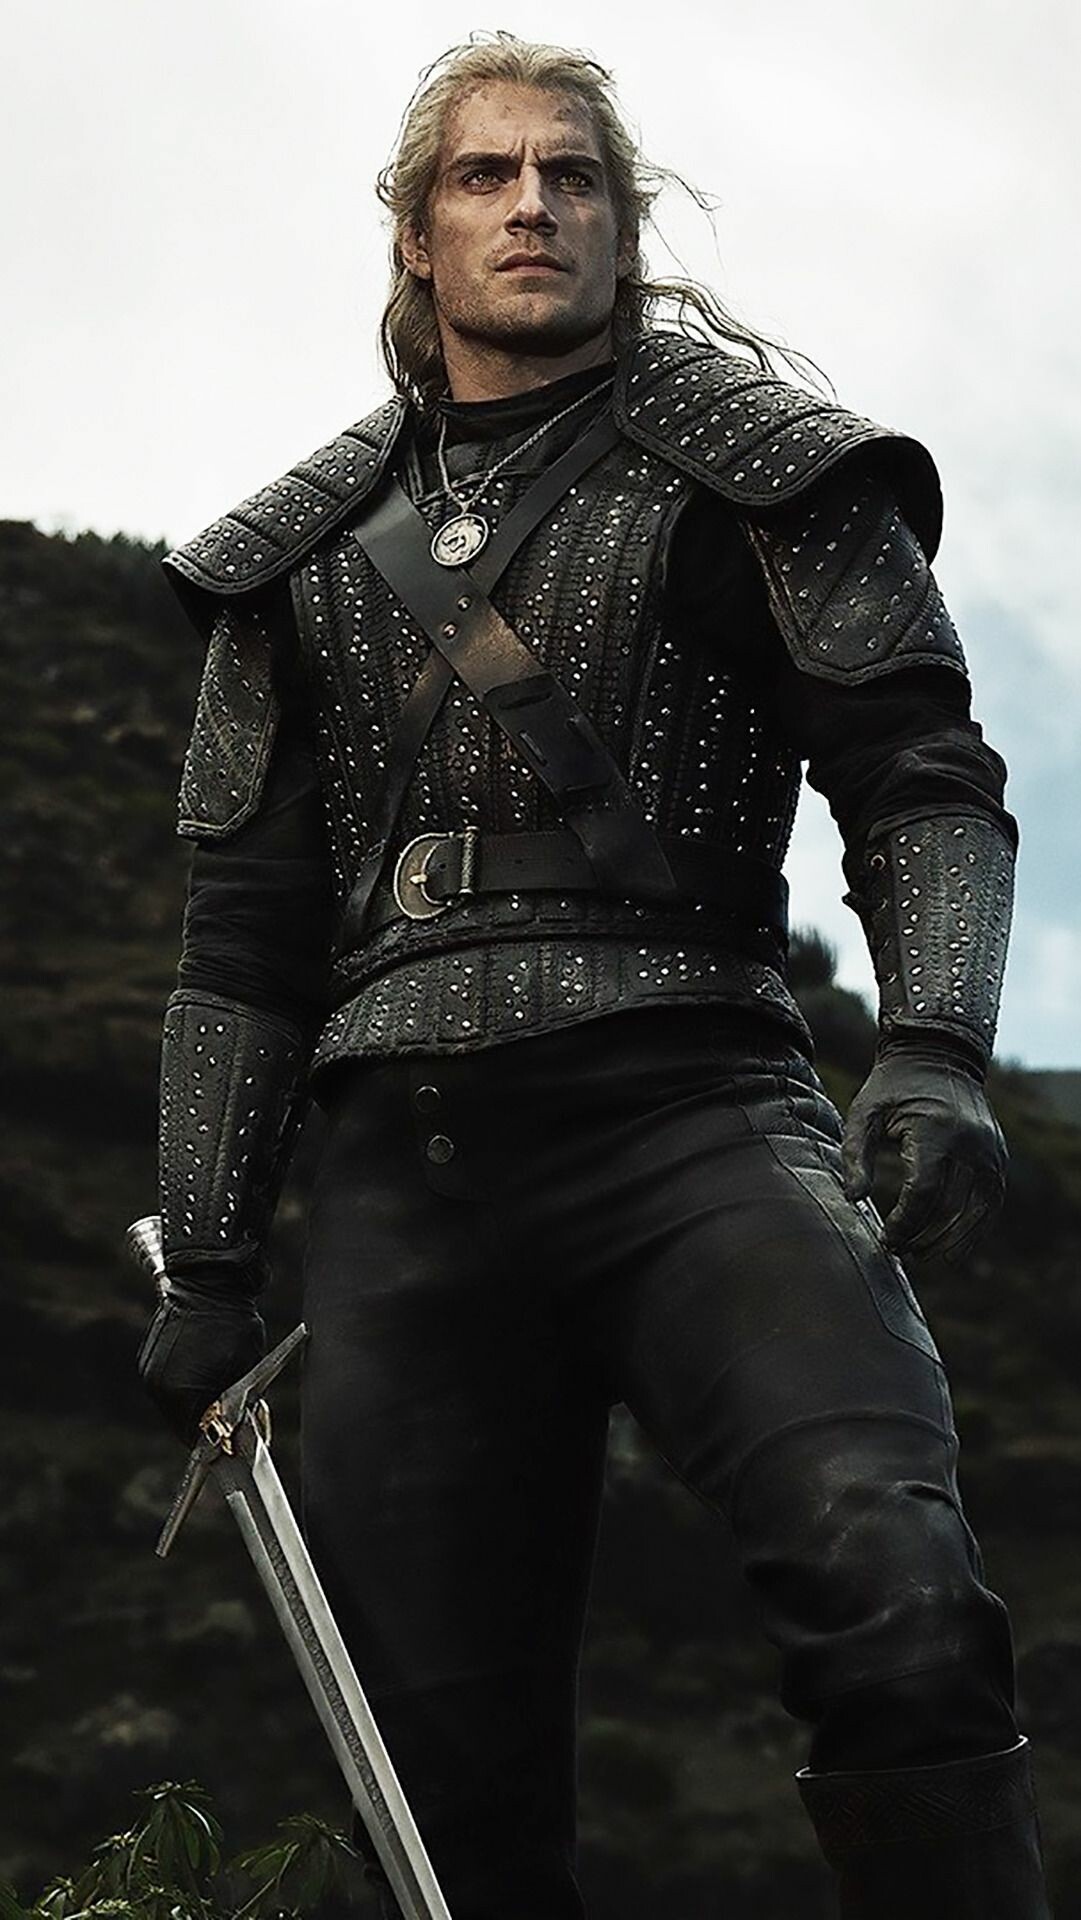 The Witcher Season 2: Geralt the Witcher, played by Henry Cavill, Netflix series. 1090x1920 HD Wallpaper.